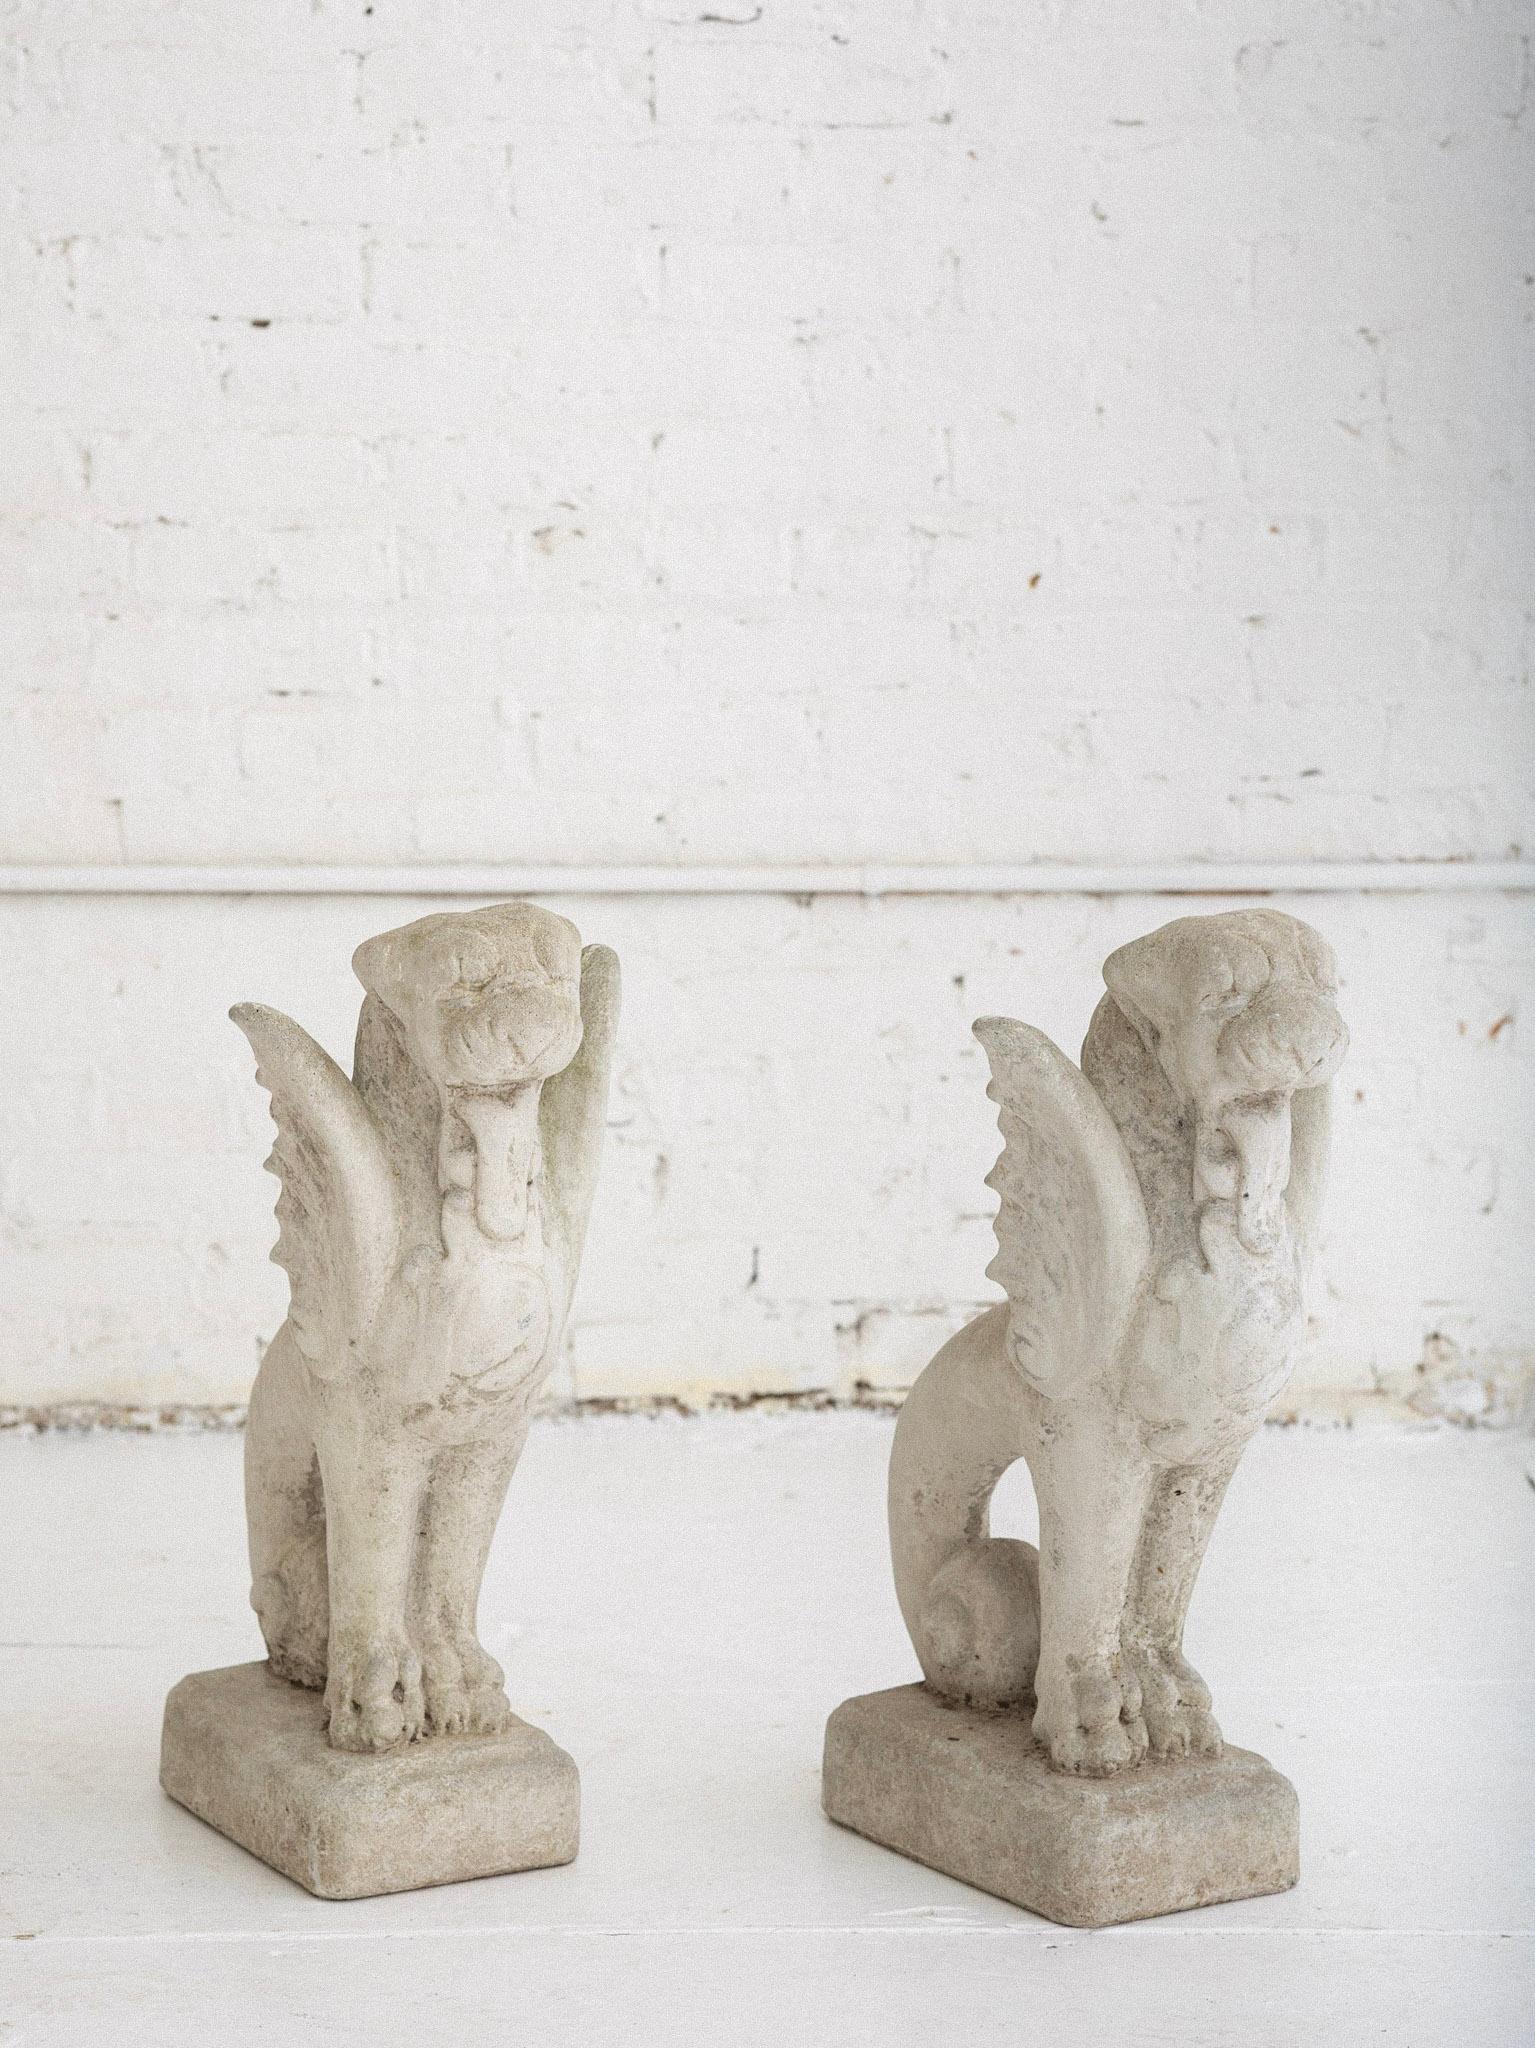 A pair of concrete cast stone garden statues. Mythical creatures with a dog or lion face, wings, fish tail and shield. Reminiscent of a gargoyle. An outdoor accent for a garden or landscaping. Weathered patina.